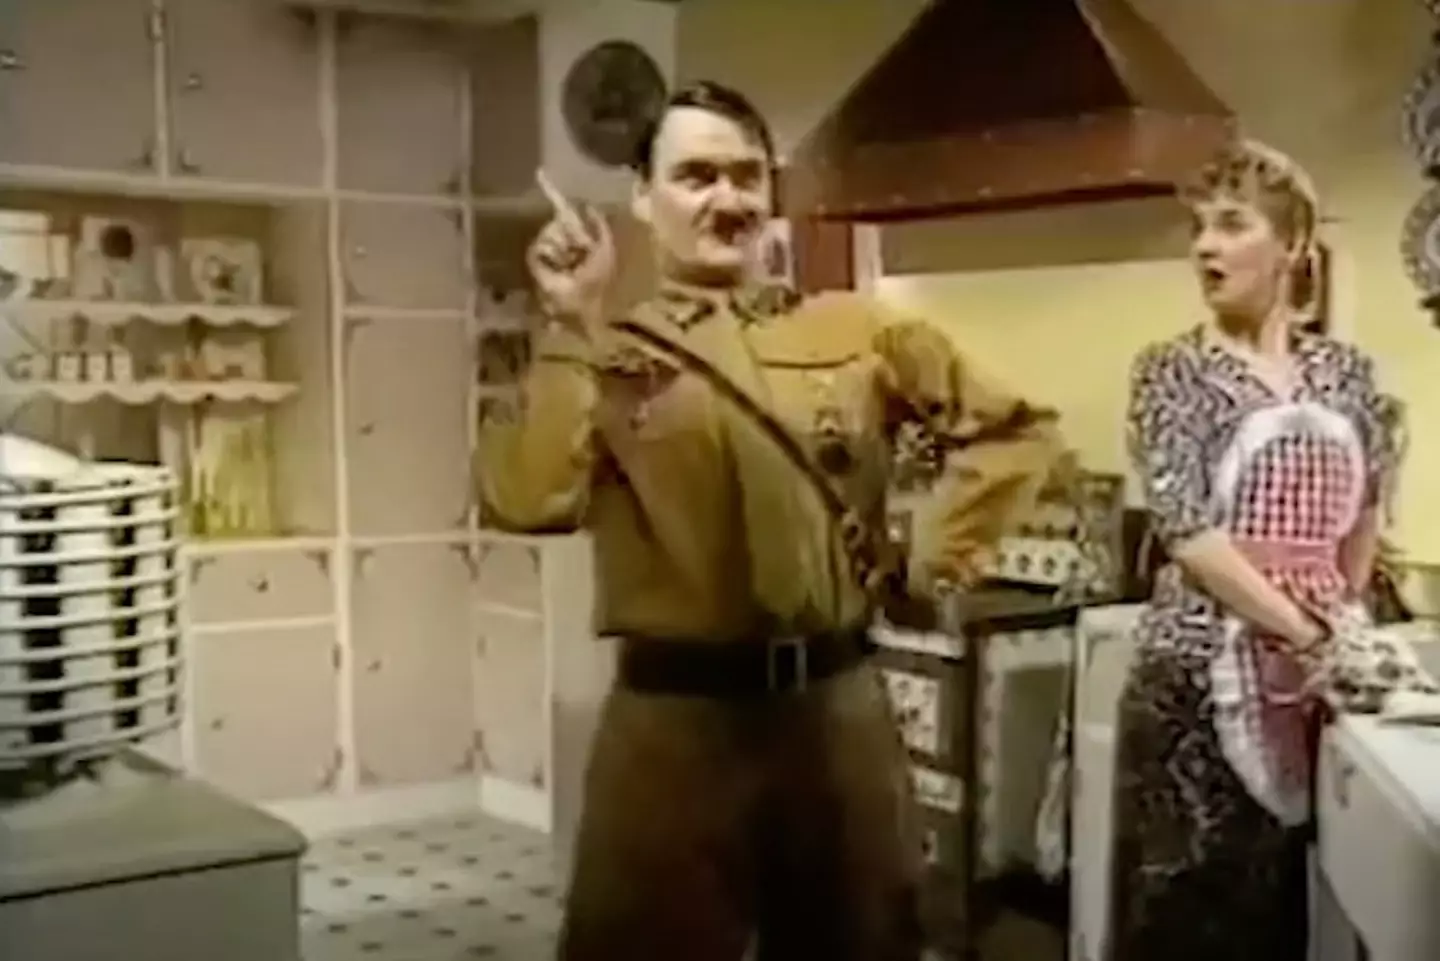 A British sitcom about Adolf Hitler was so offensive it was taken off air after the first episode.